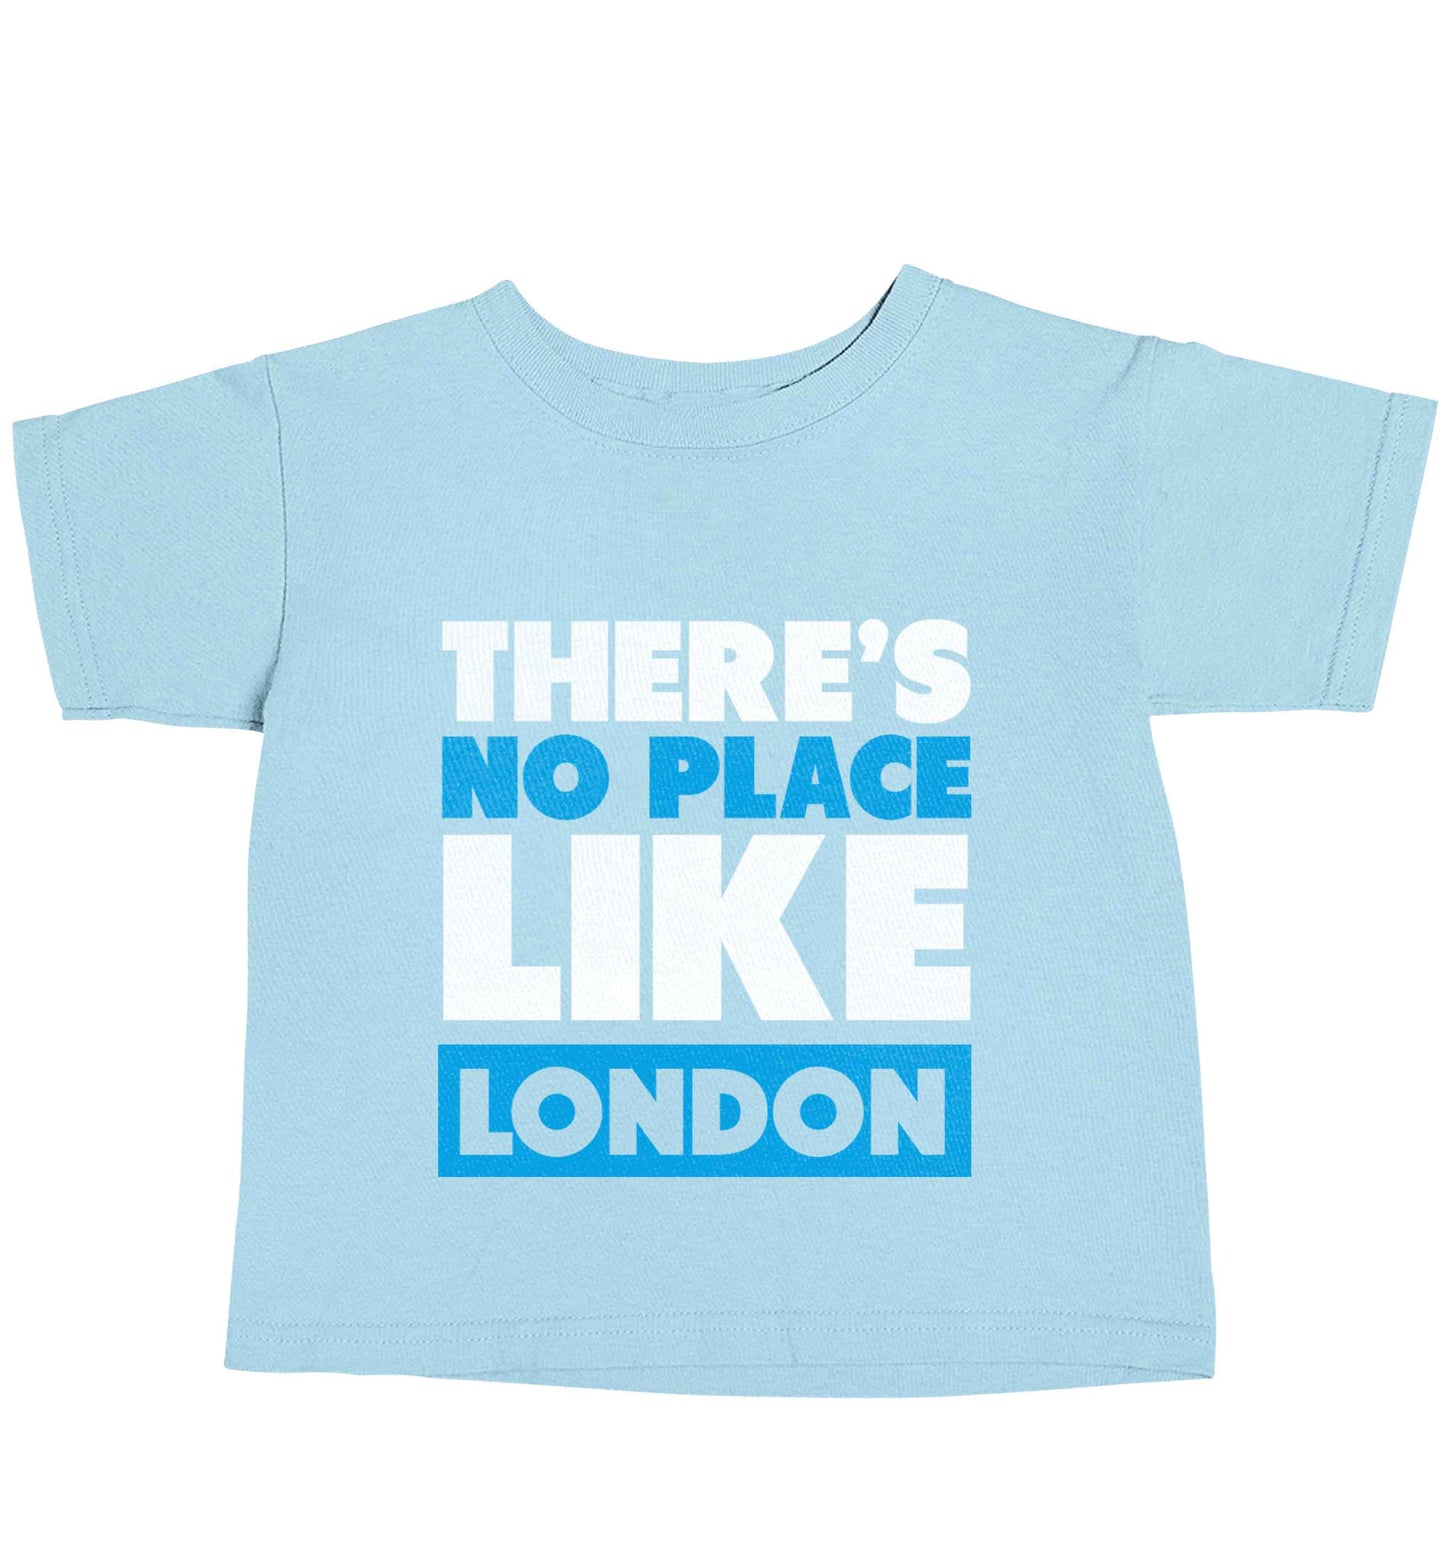 There's no place like England light blue baby toddler Tshirt 2 Years